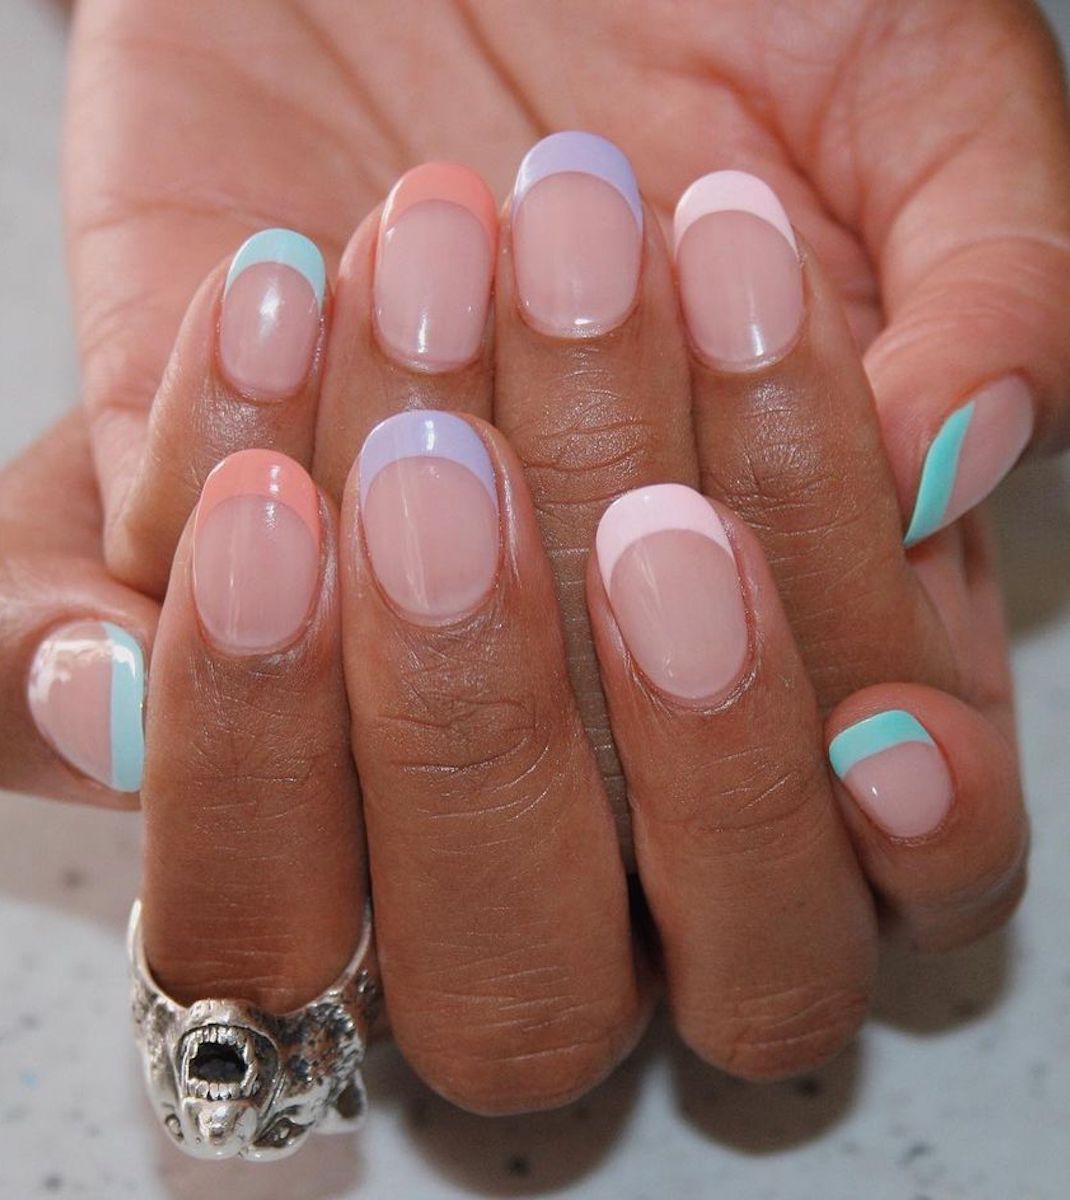 UPDATED] 39 Colored French Tips to Make a Statement